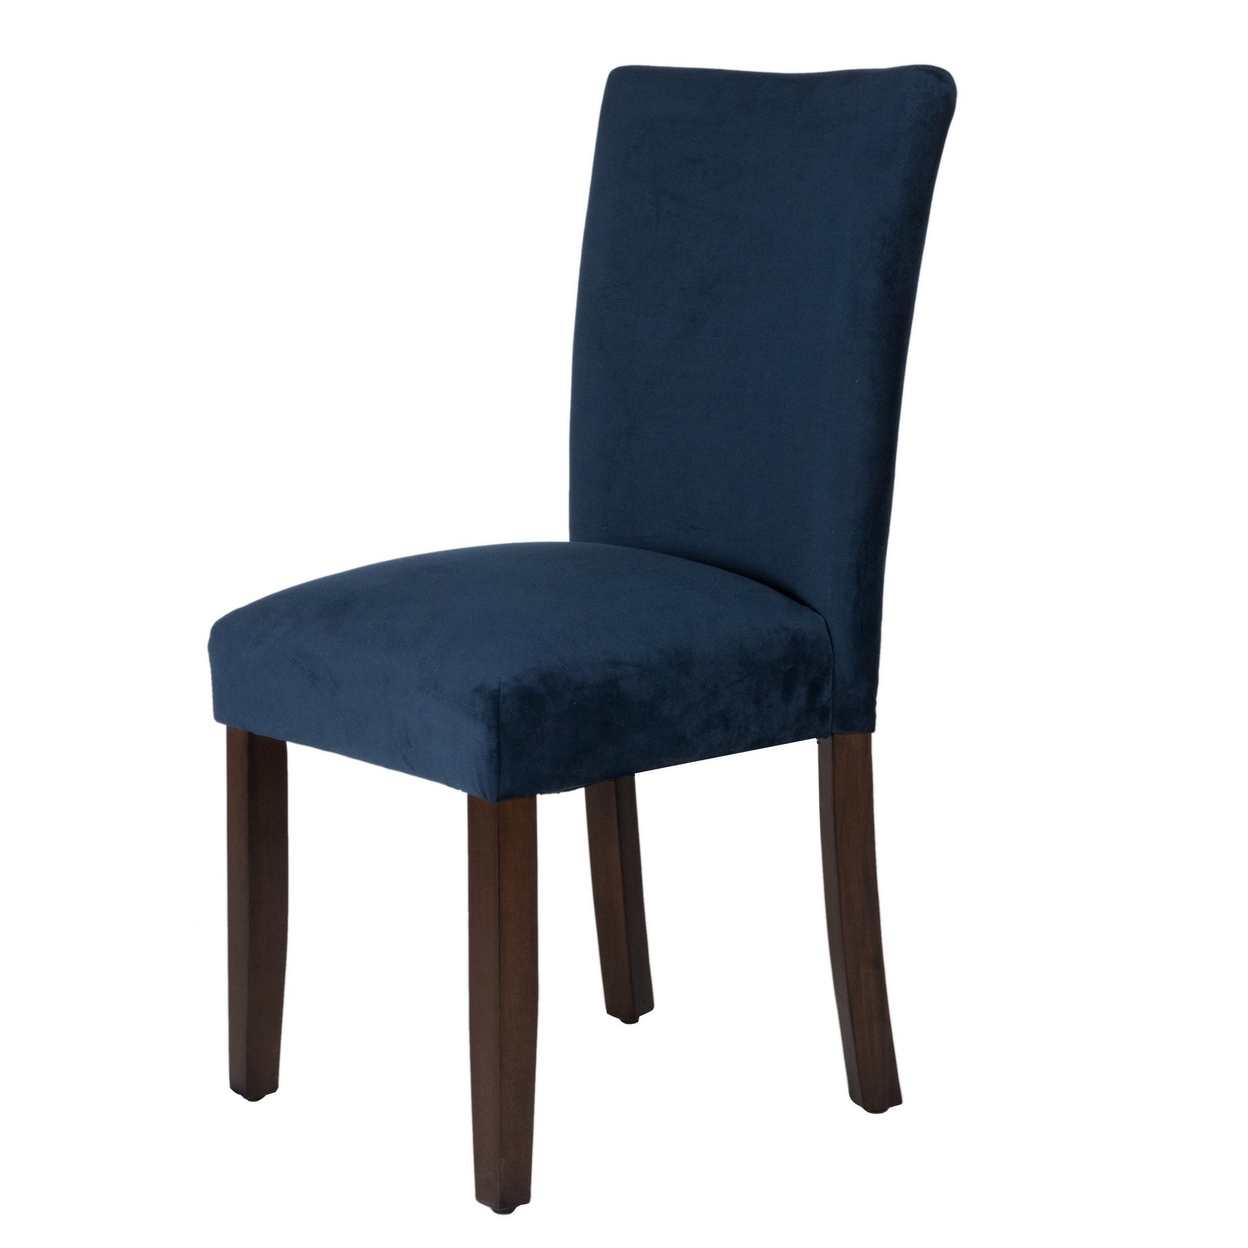 Velvet Upholstered Parsons Dining Chair With Wooden Legs, Navy Blue And Brown, Set Of Two- Saltoro Sherpi